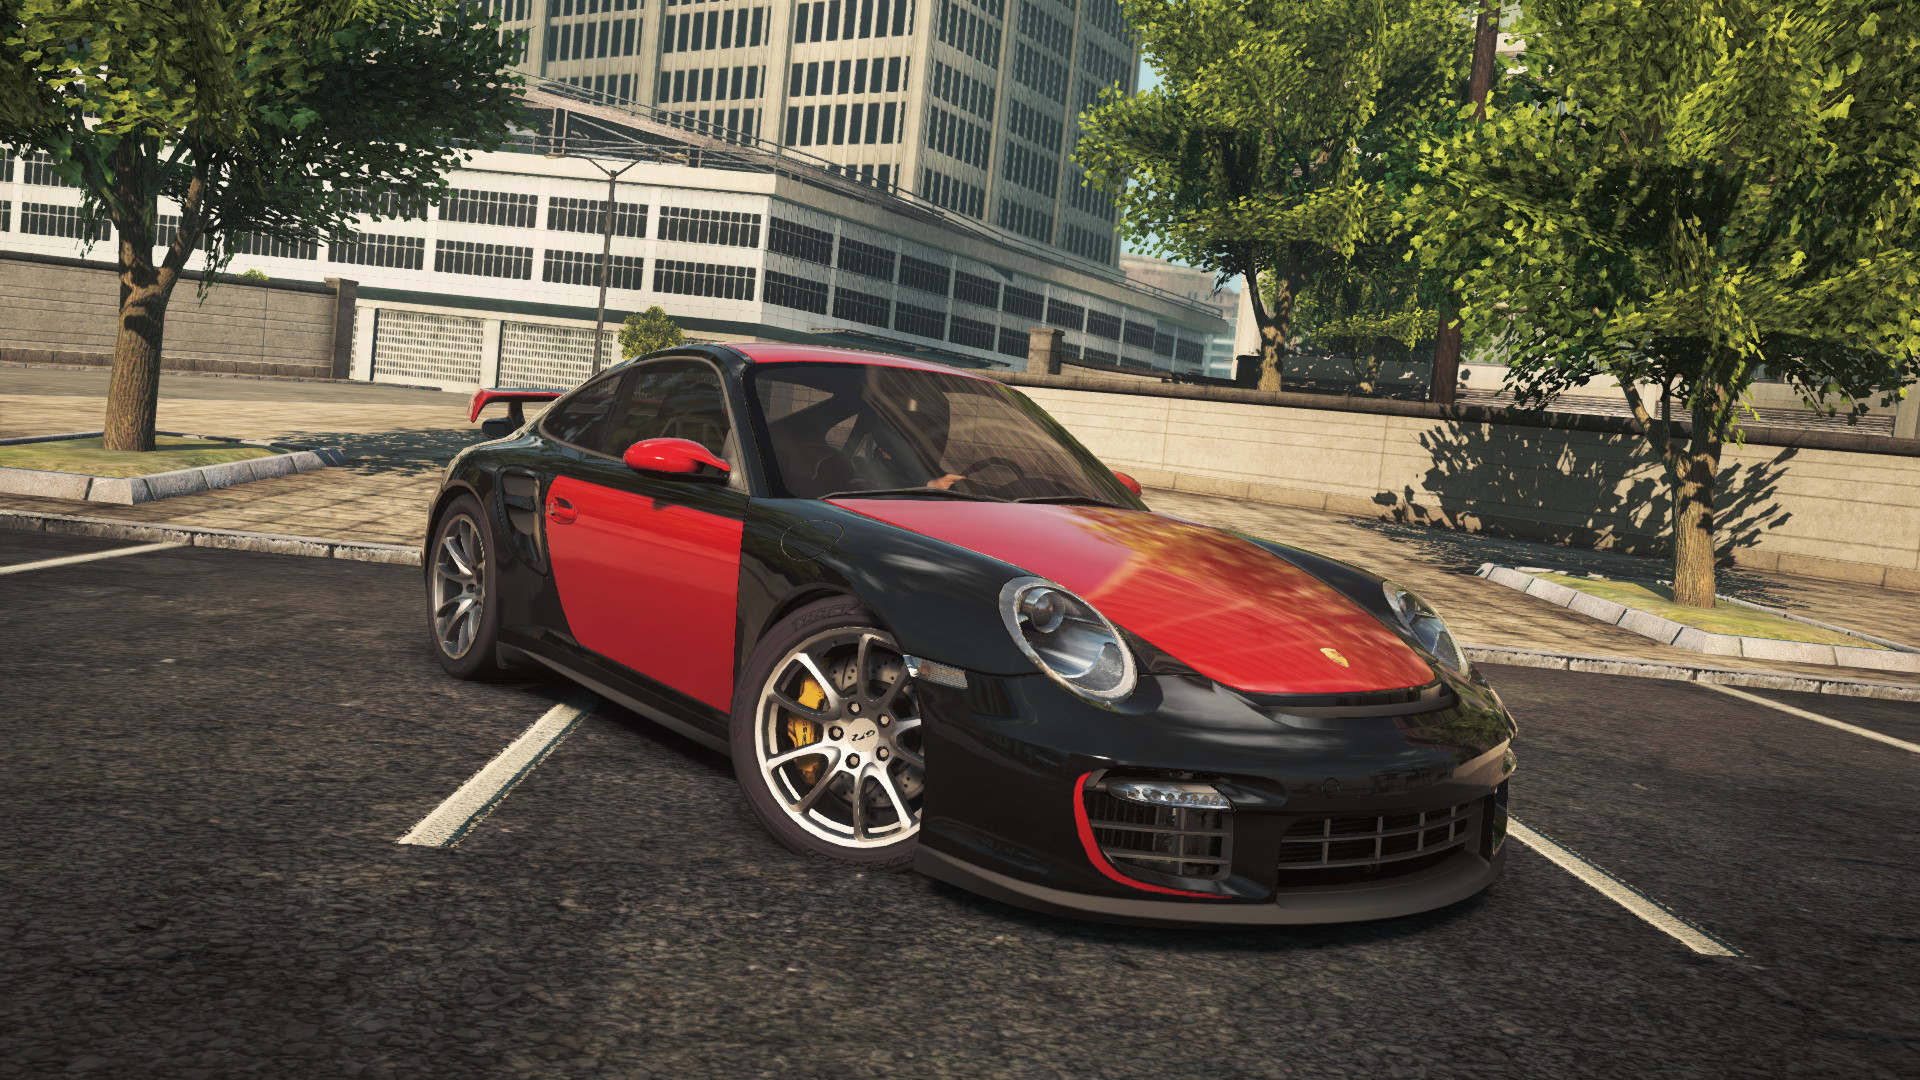 Need For Speed Most Wanted 2012 NFSMW12 - Rose's 911 GT2 Improved Livery